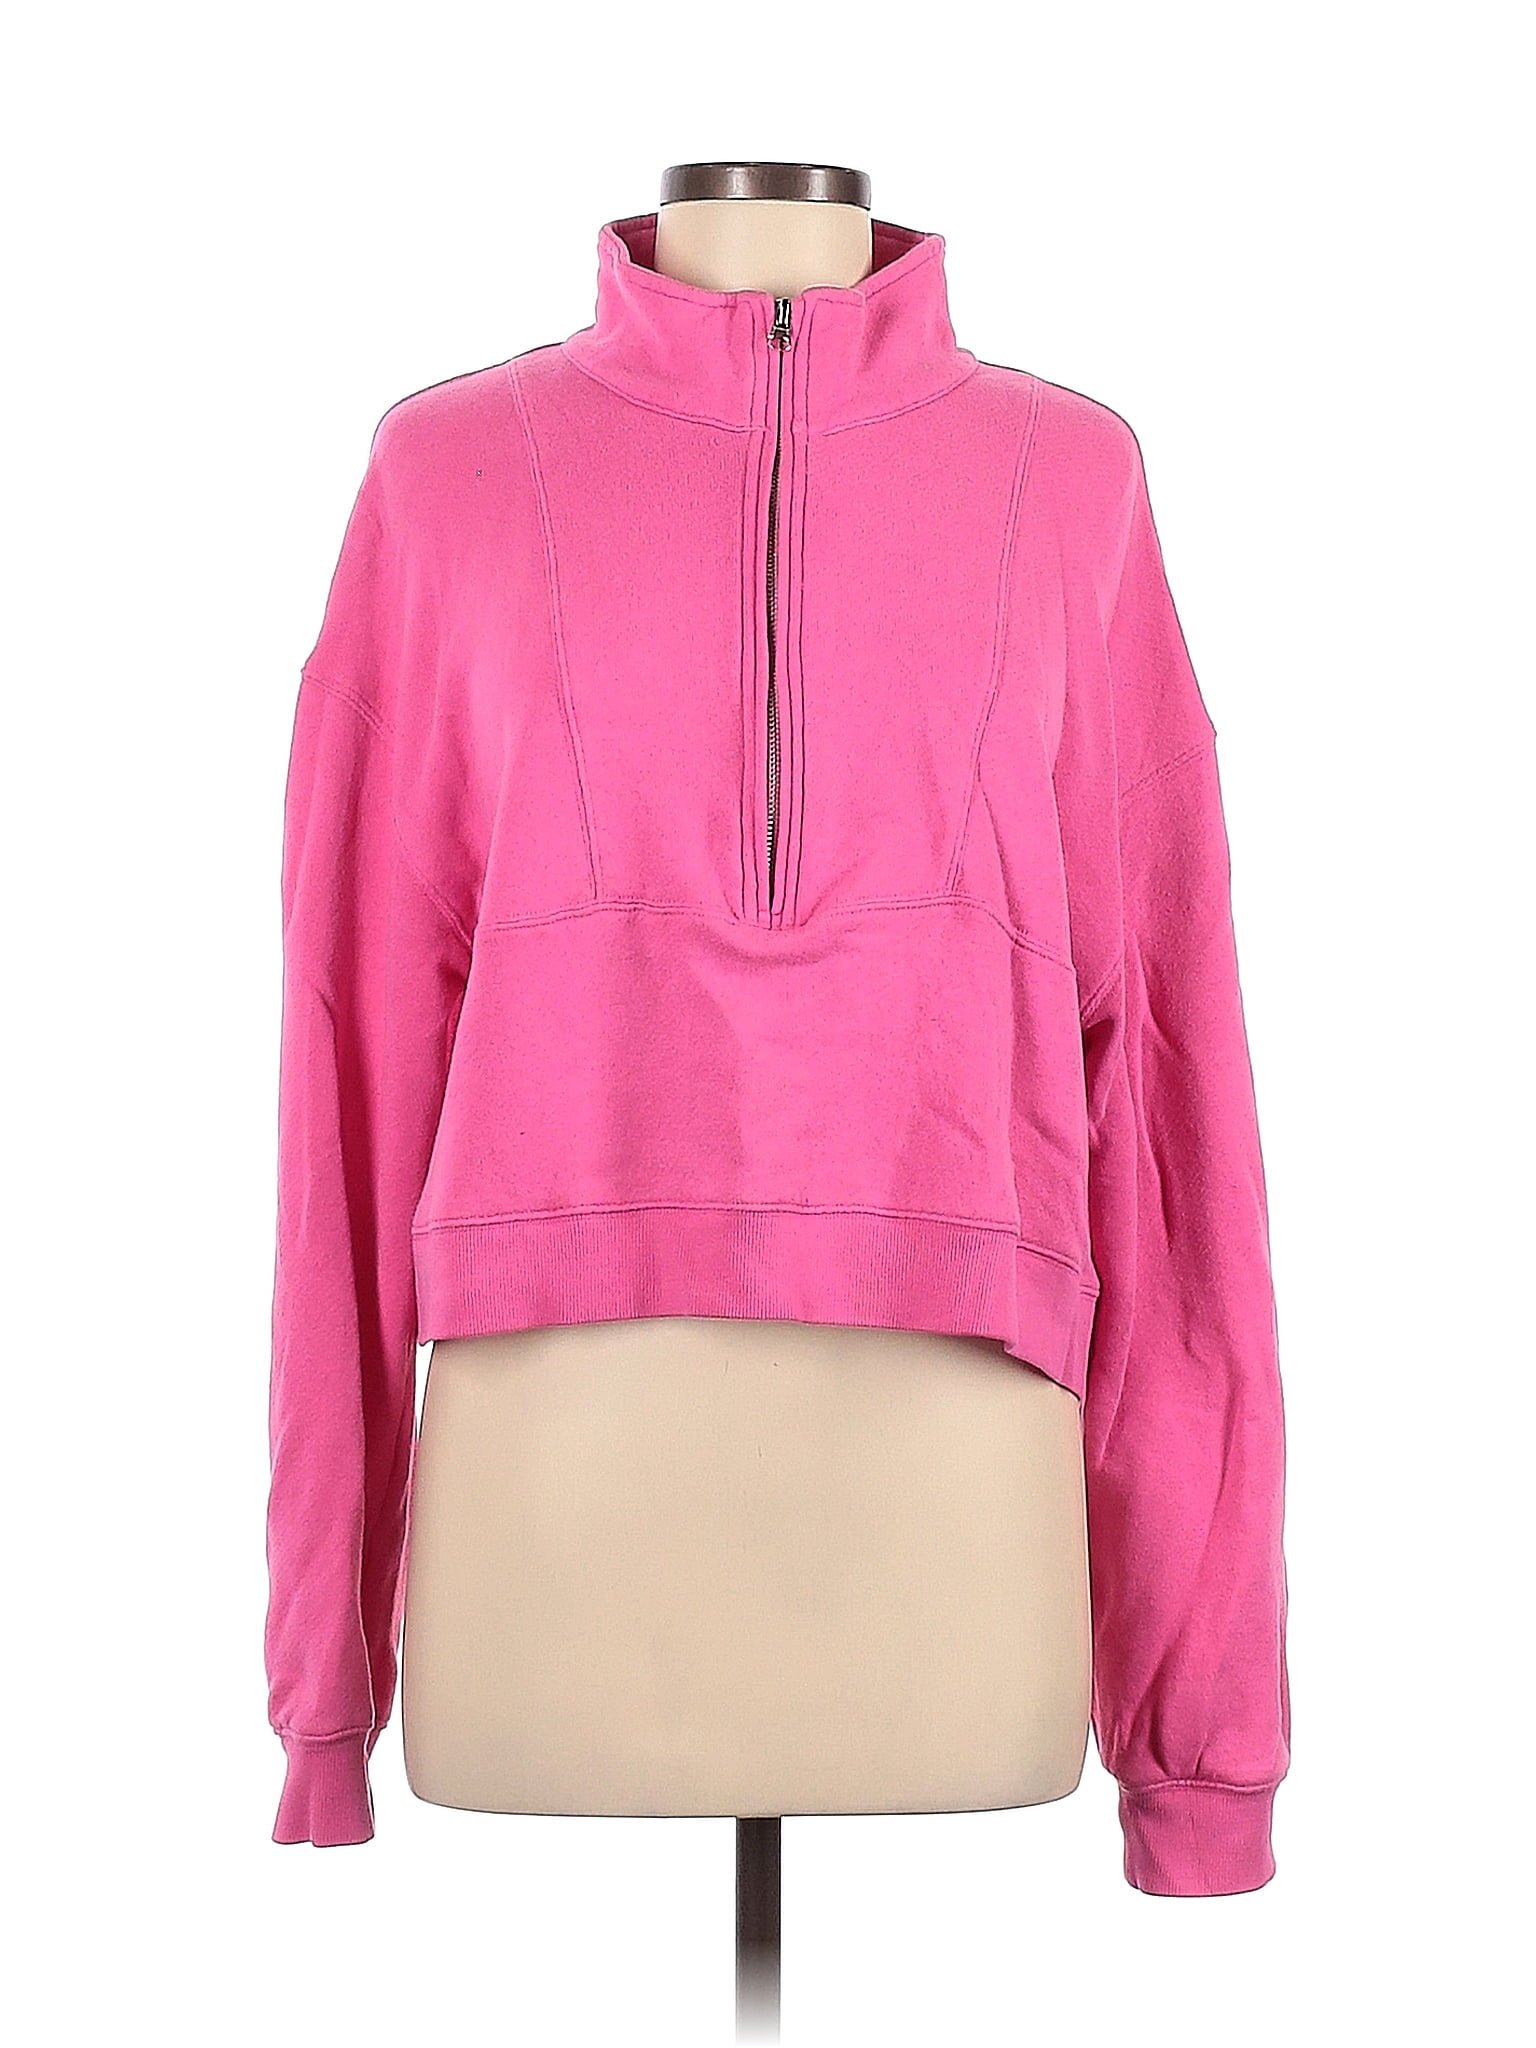 Sincerely Jules for Bandier 100% Cotton Pink Track Jacket Size M